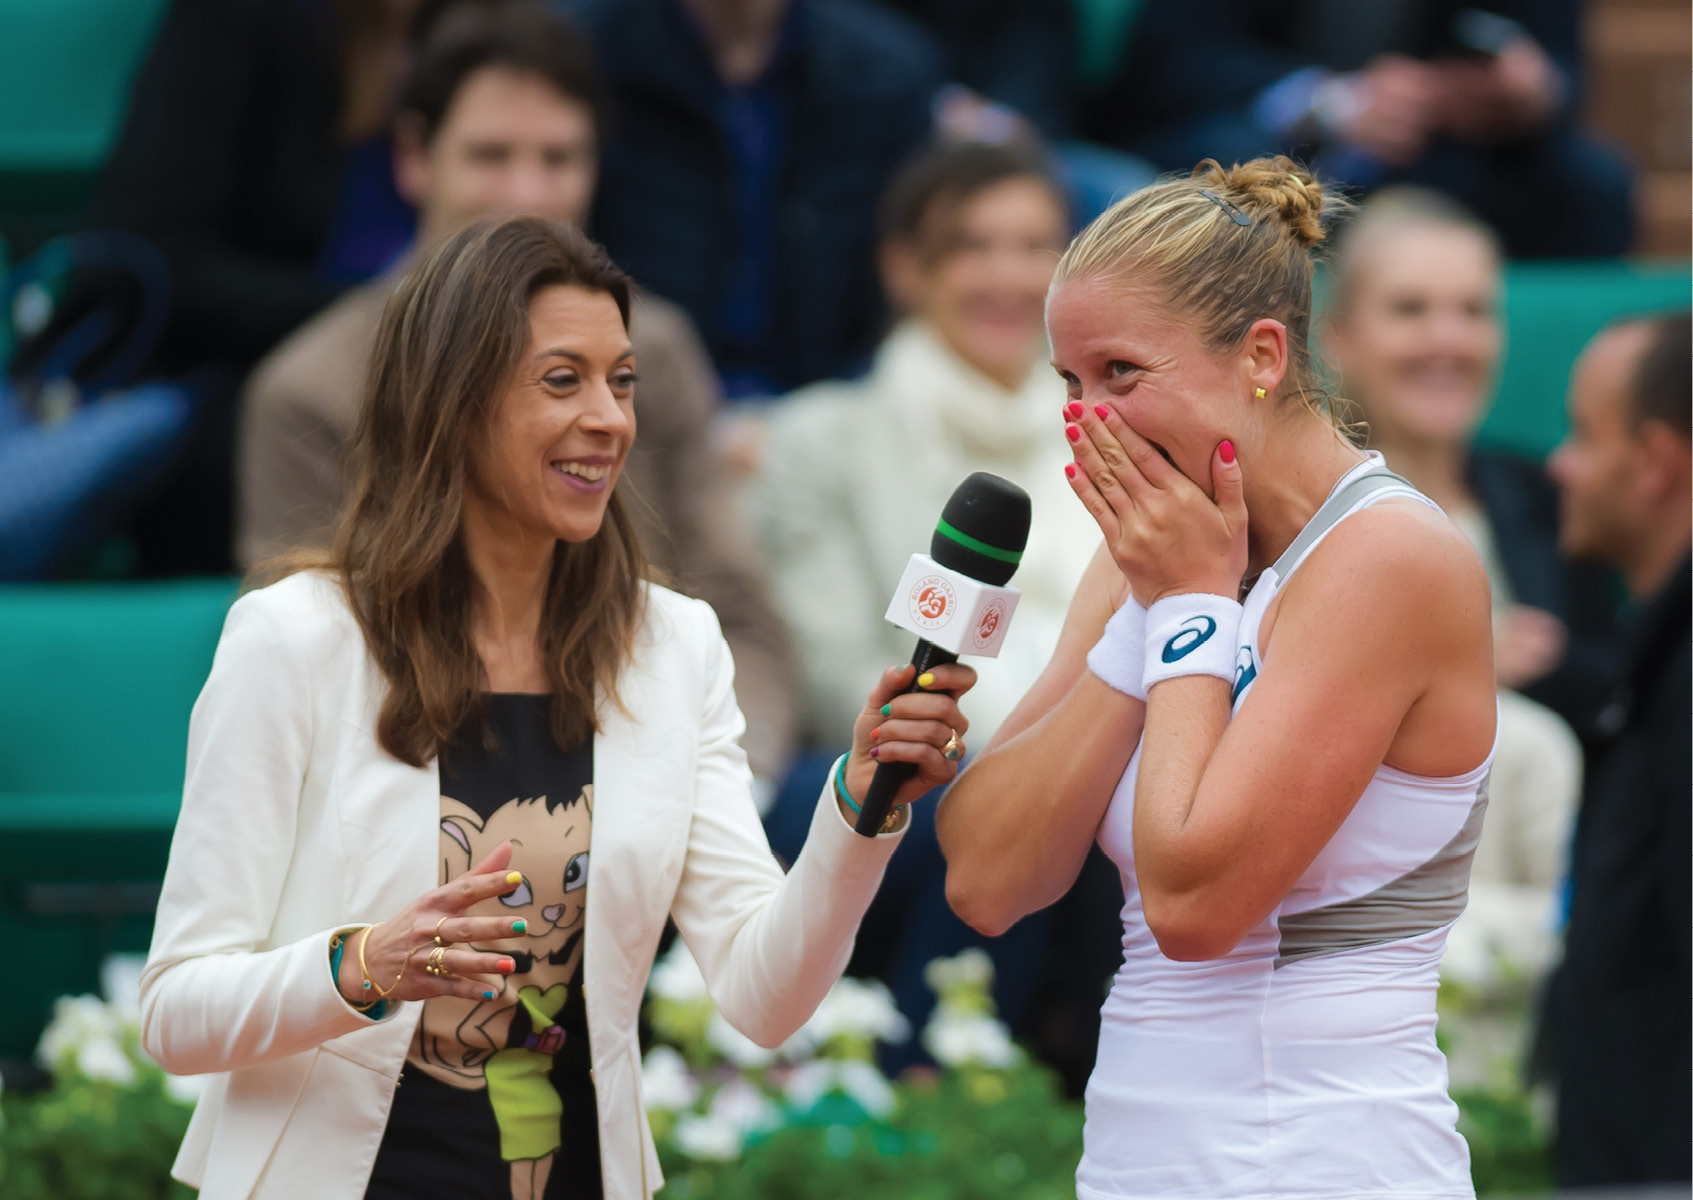 During her French Open on-court interview with Marion Bartoli after her win into the quarterfinals, Rogers tearfully said, “I always dreamed it would happen, but I’m not sure I thought I could.”